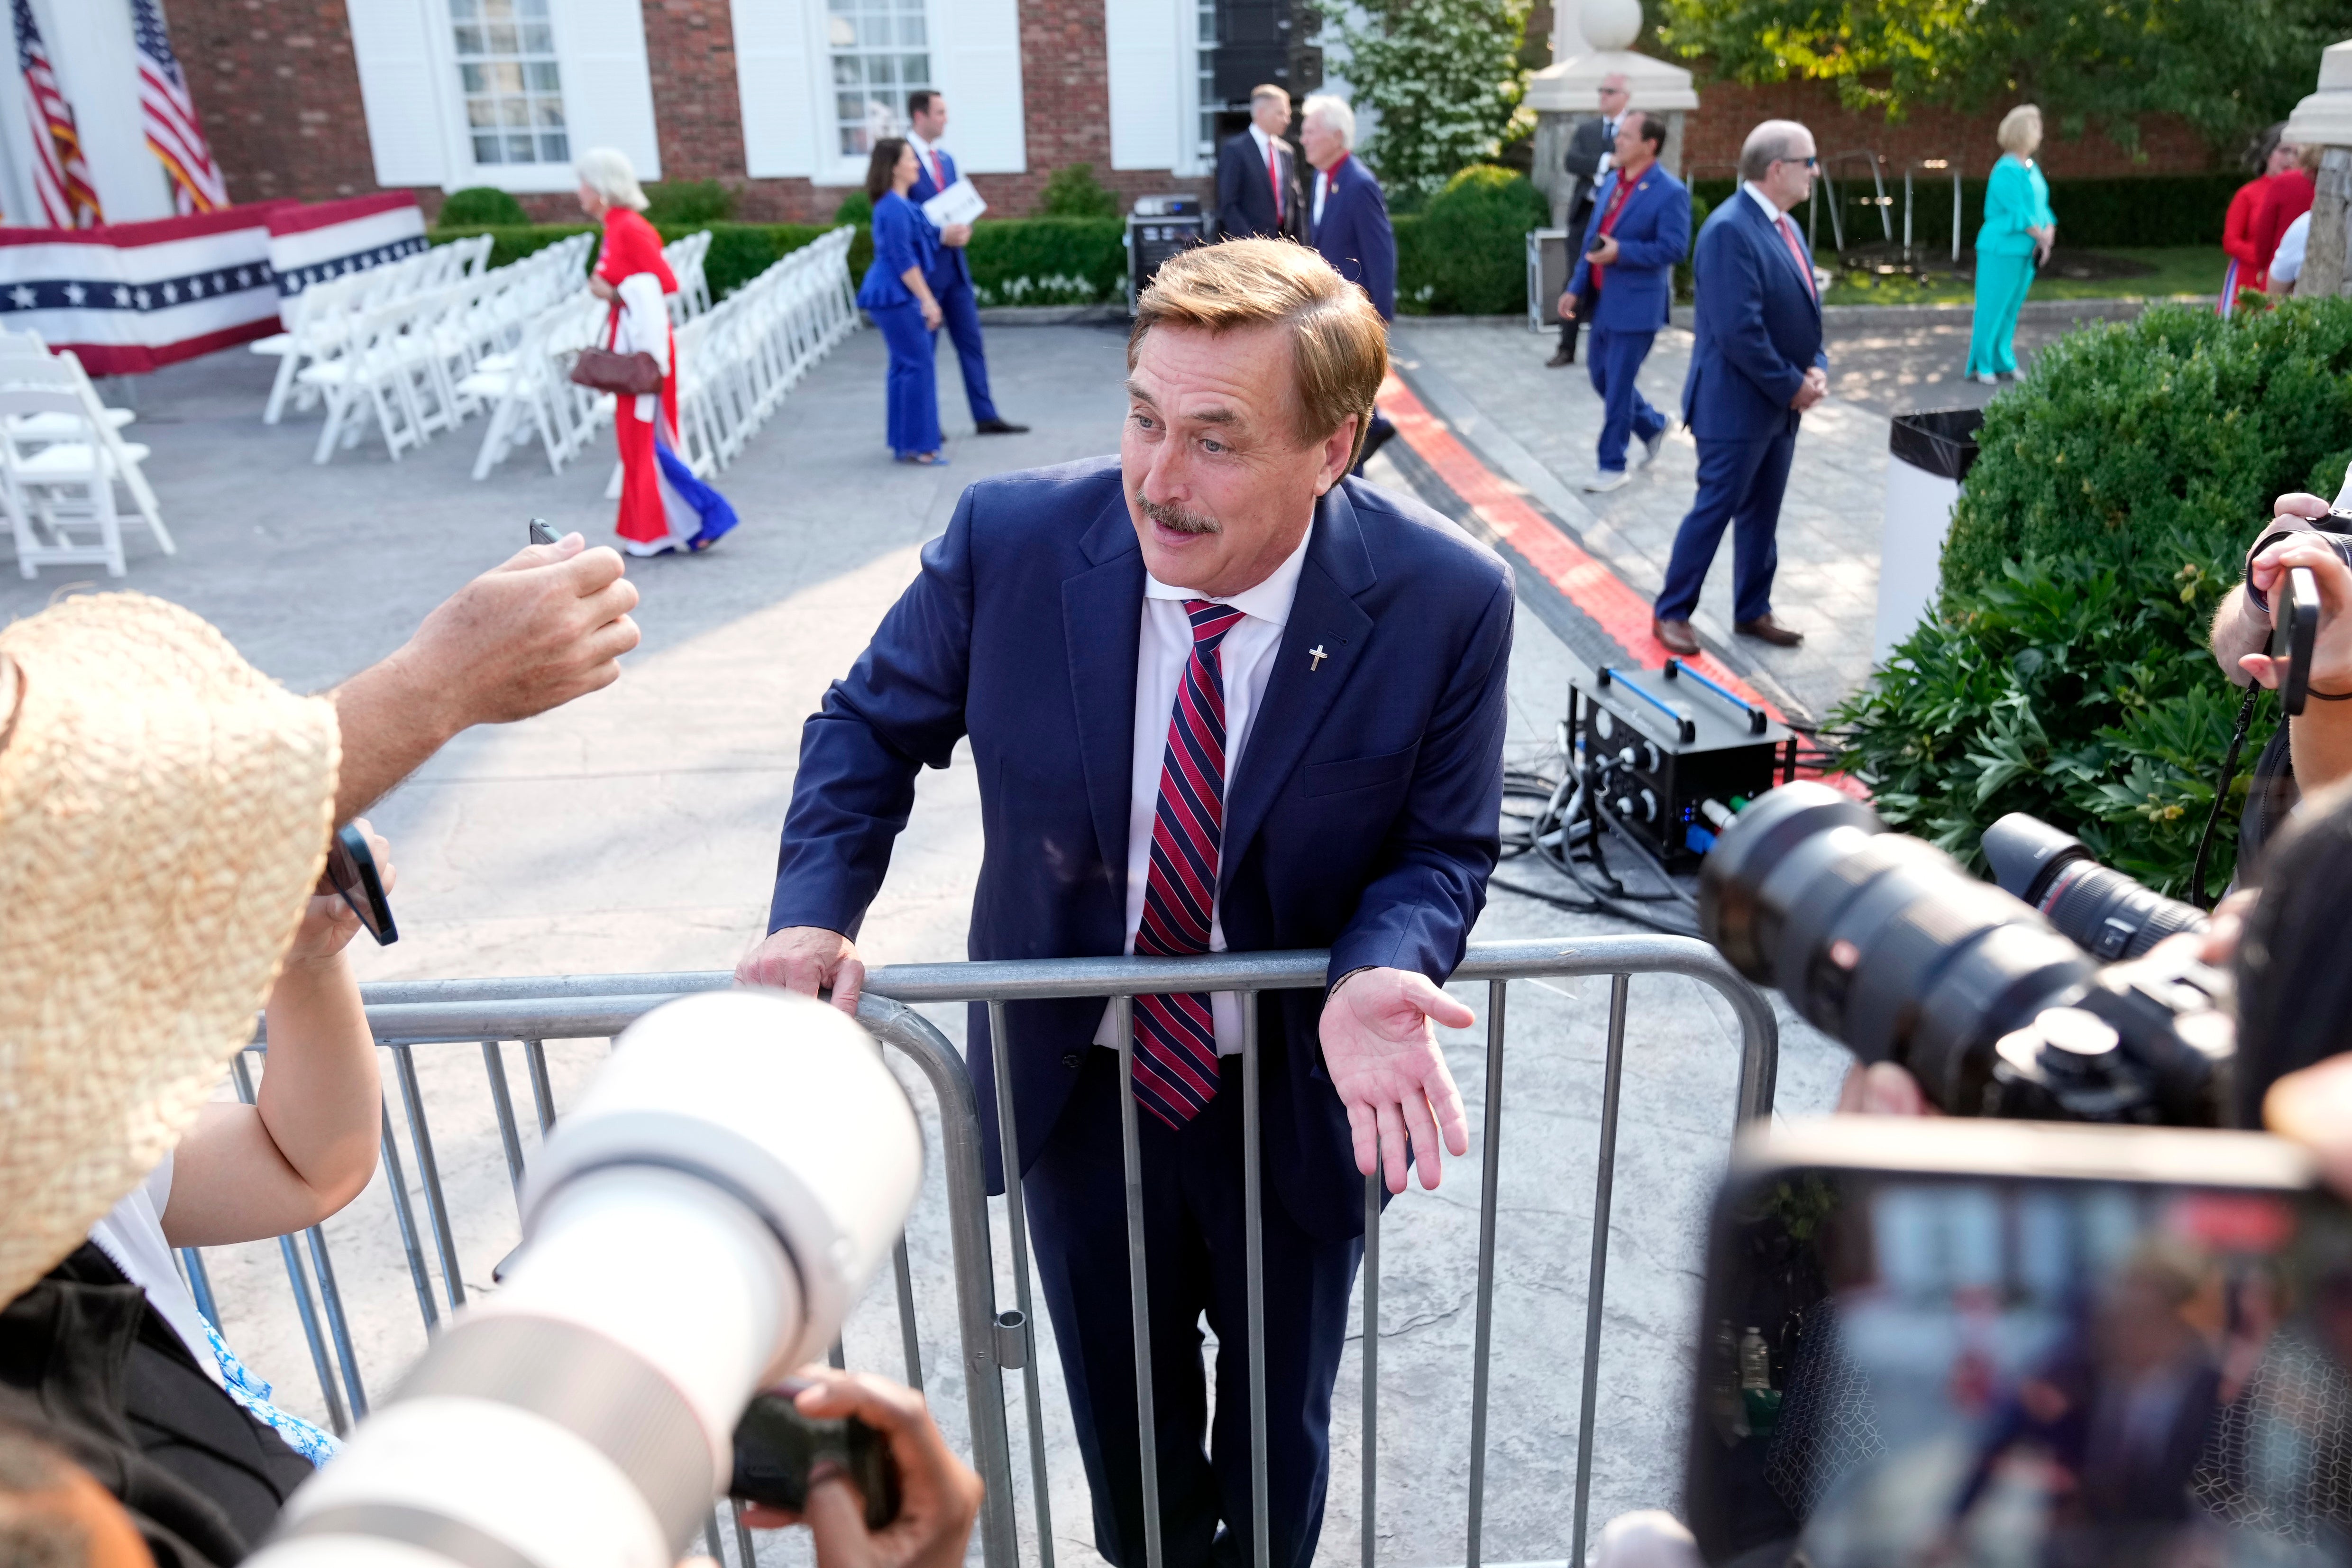 Mike Lindell appears at Donald Trump’s New Jersey club in June 2023 after the former president pleaded not guilty to federal charges for mishandling classified documents.